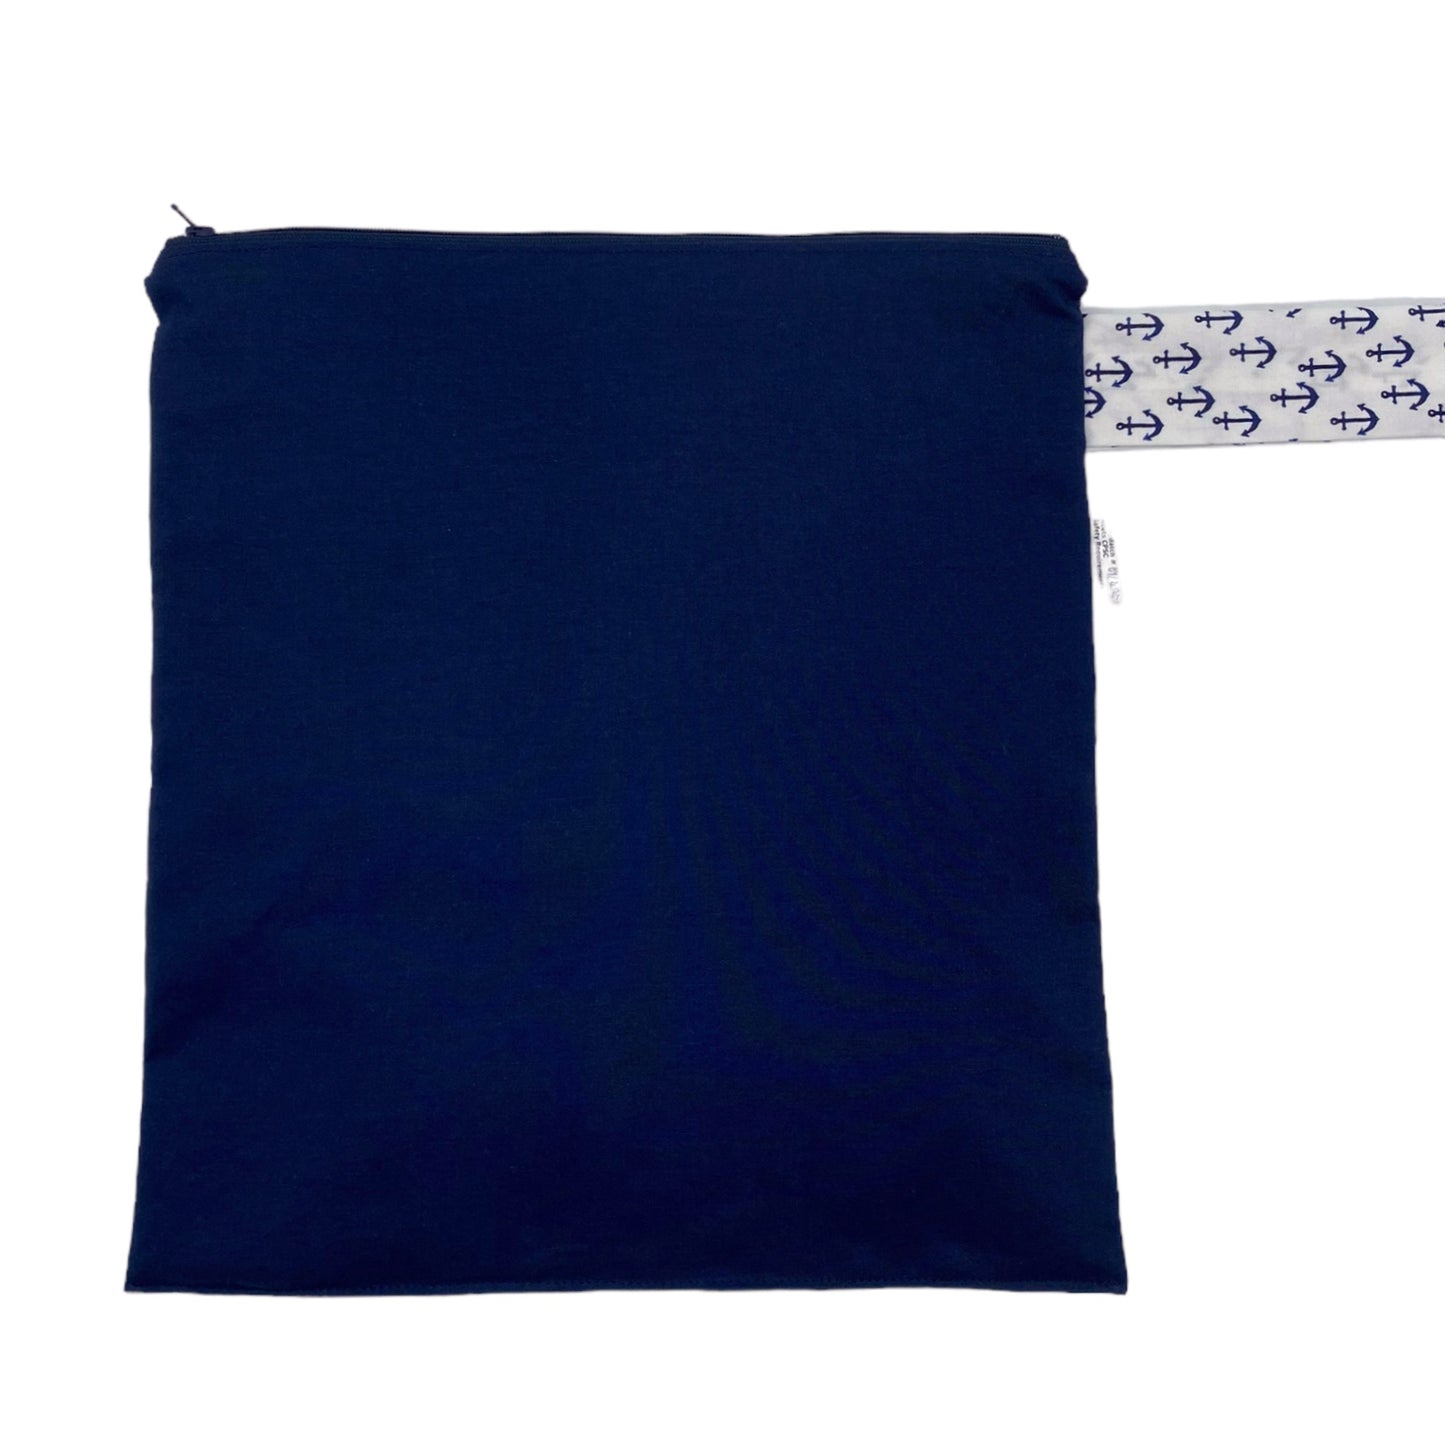 Large Wet Bag with Handle Solid Navy with Anchors